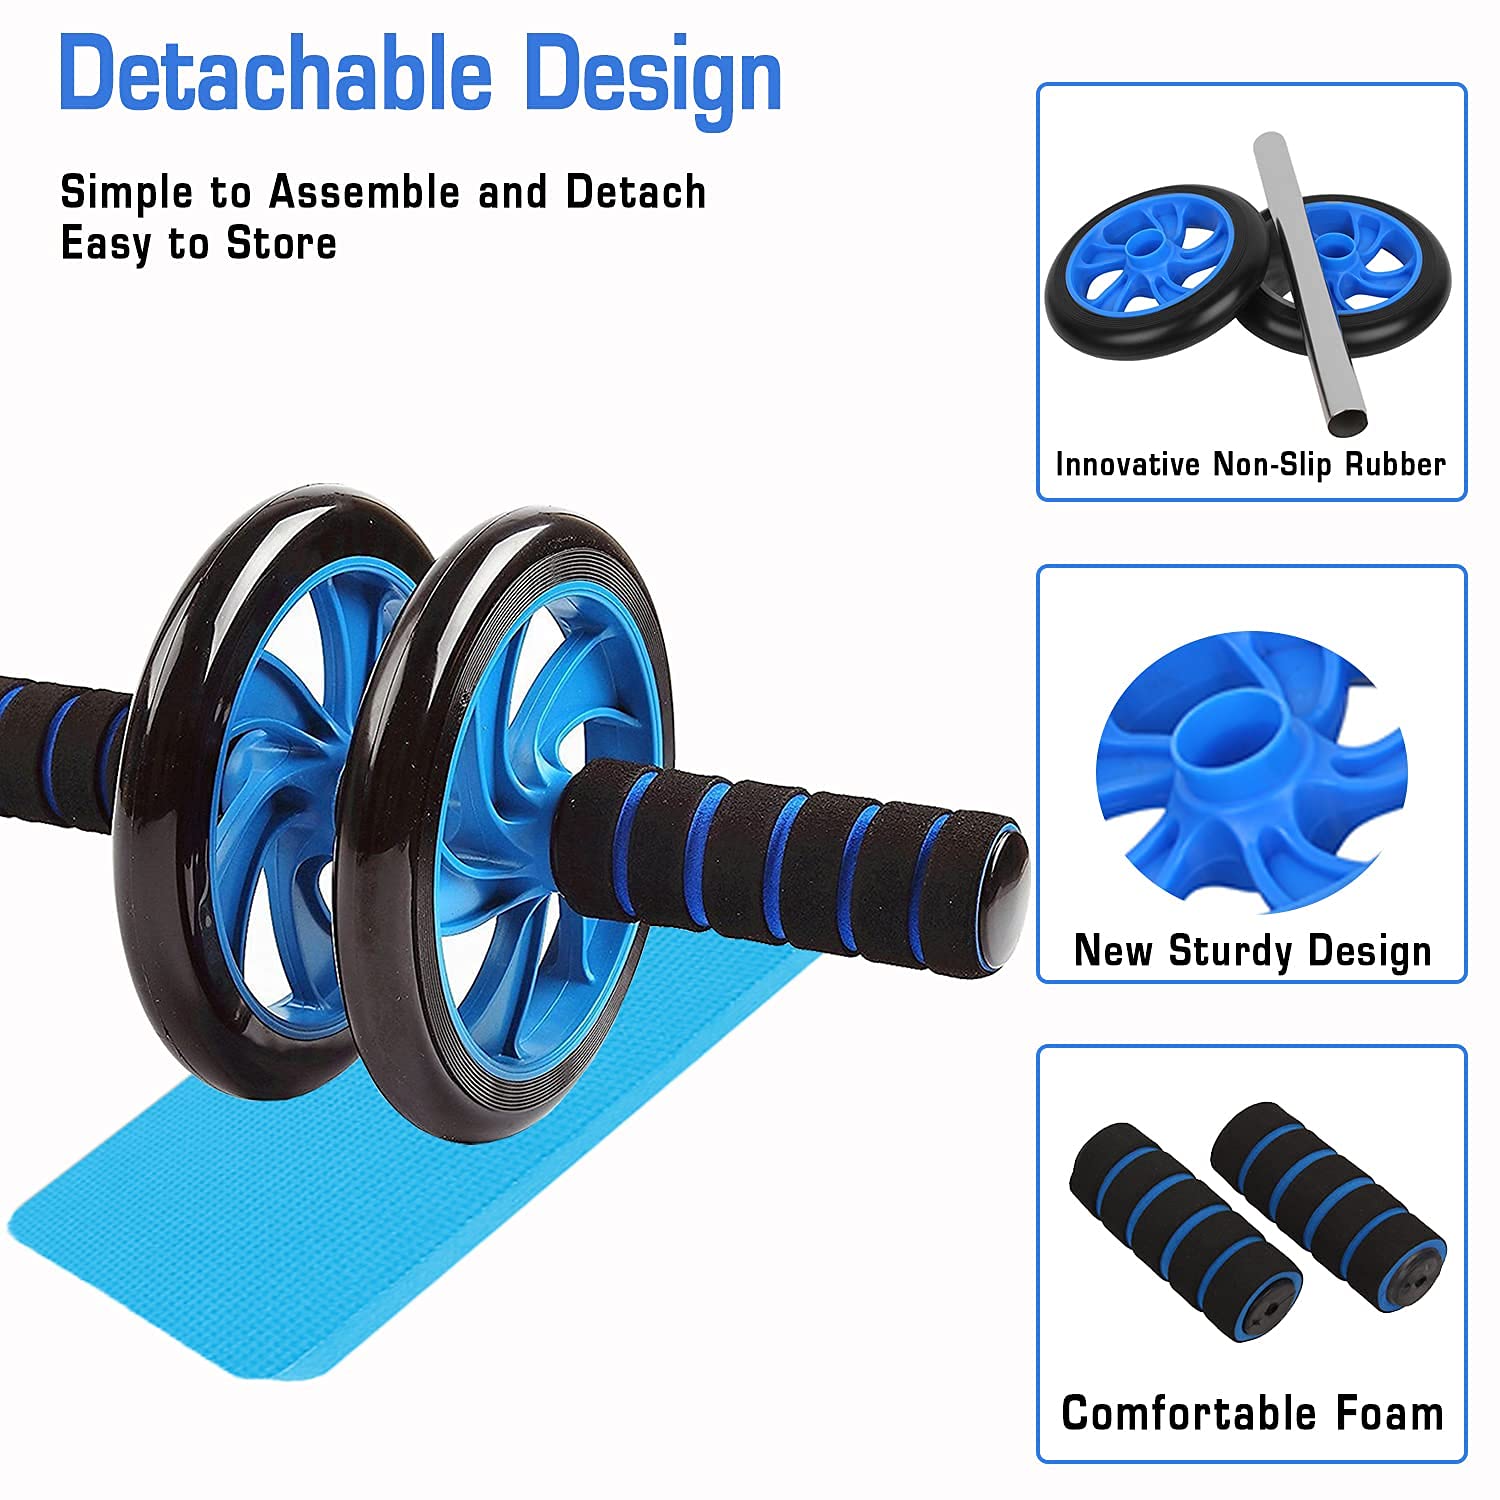 Ab Roller Wheel With Knee Mat